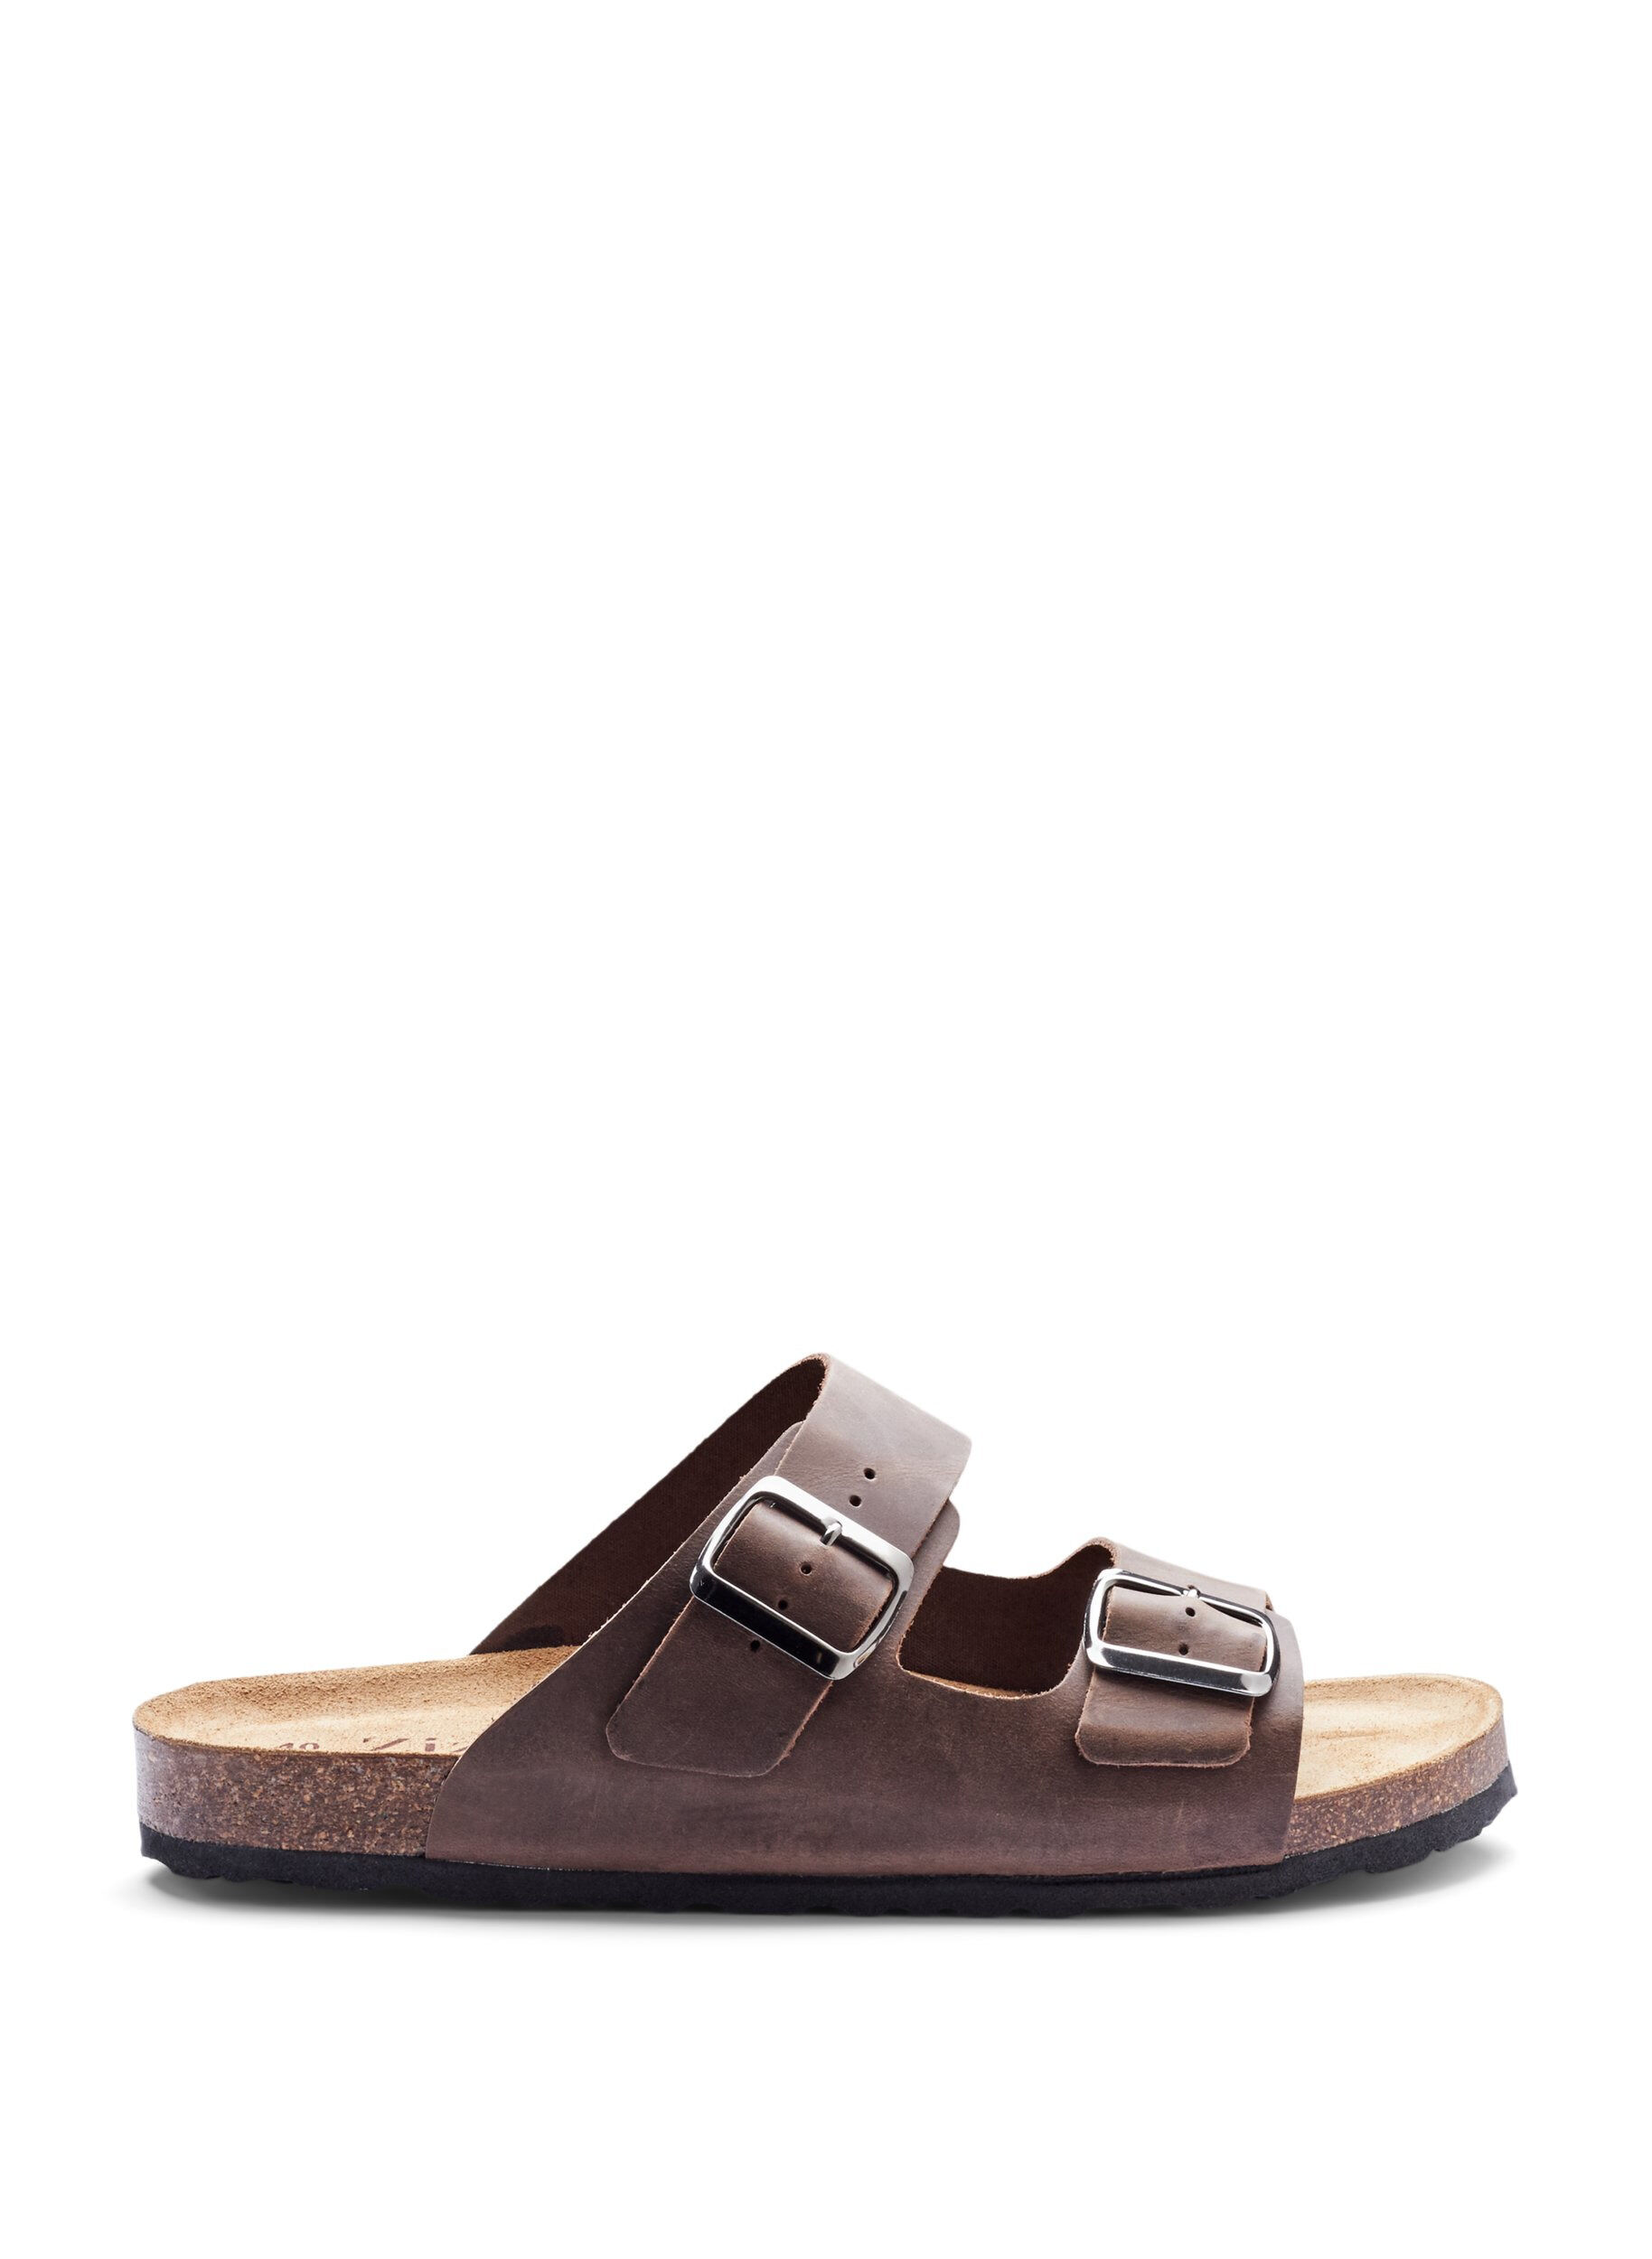 brown sandals wide fit